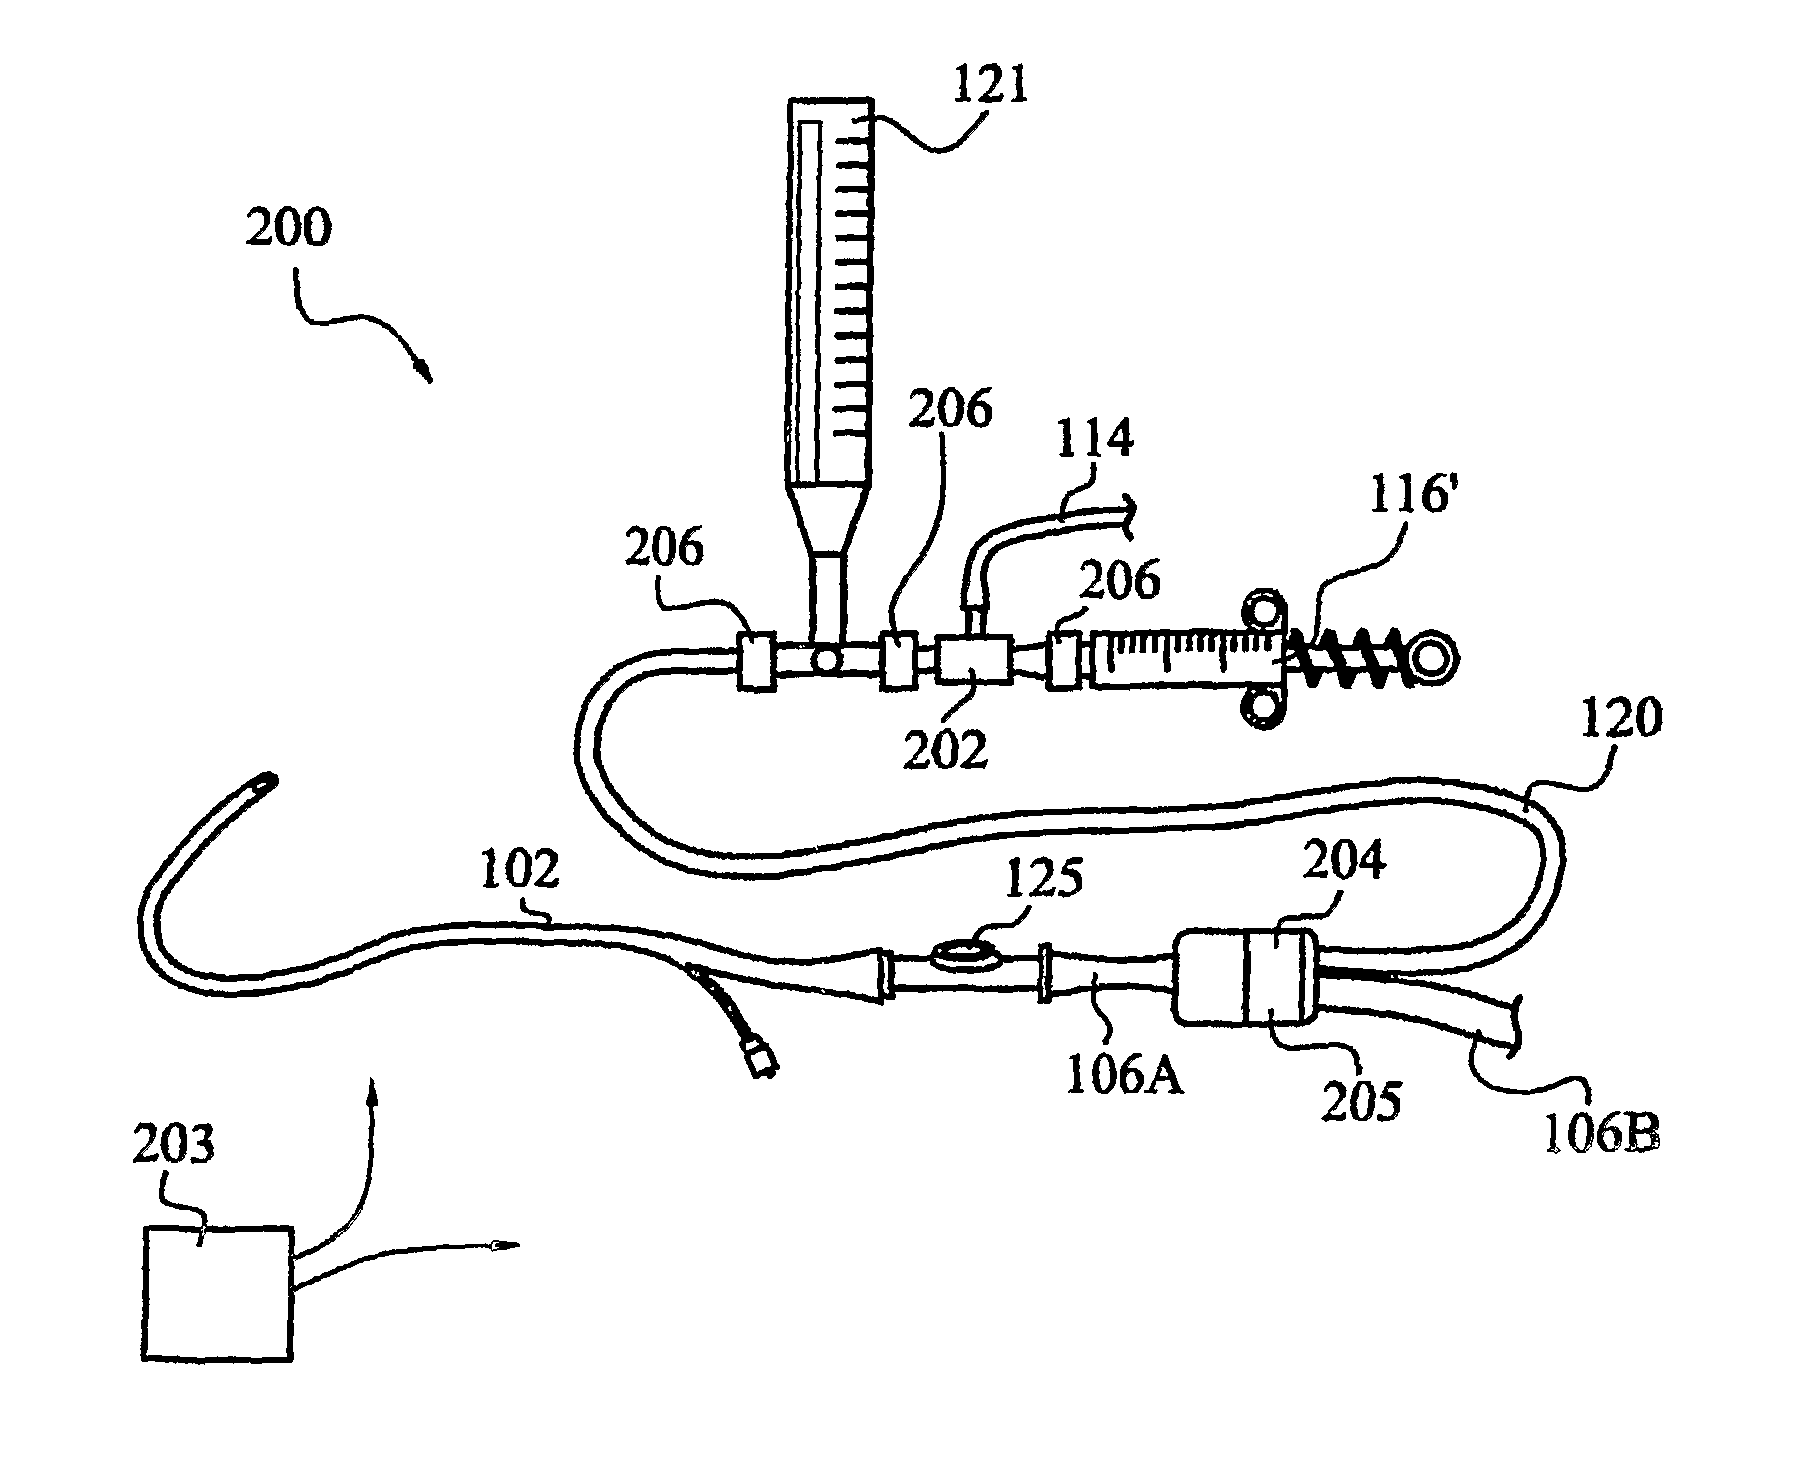 Intra-abdominal pressure monitoring device and method